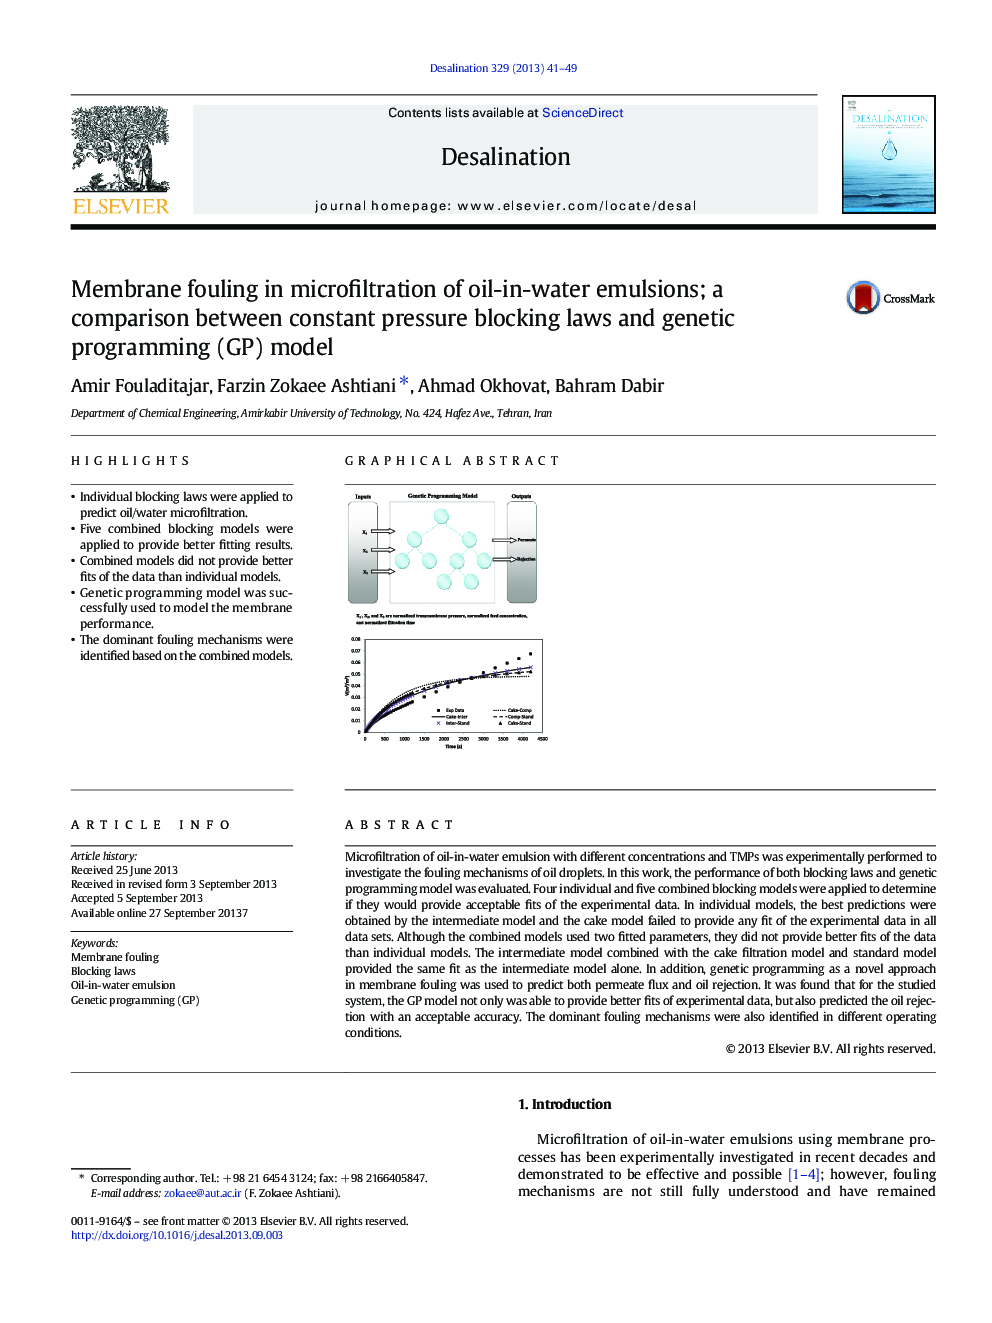 Membrane fouling in microfiltration of oil-in-water emulsions; a comparison between constant pressure blocking laws and genetic programming (GP) model